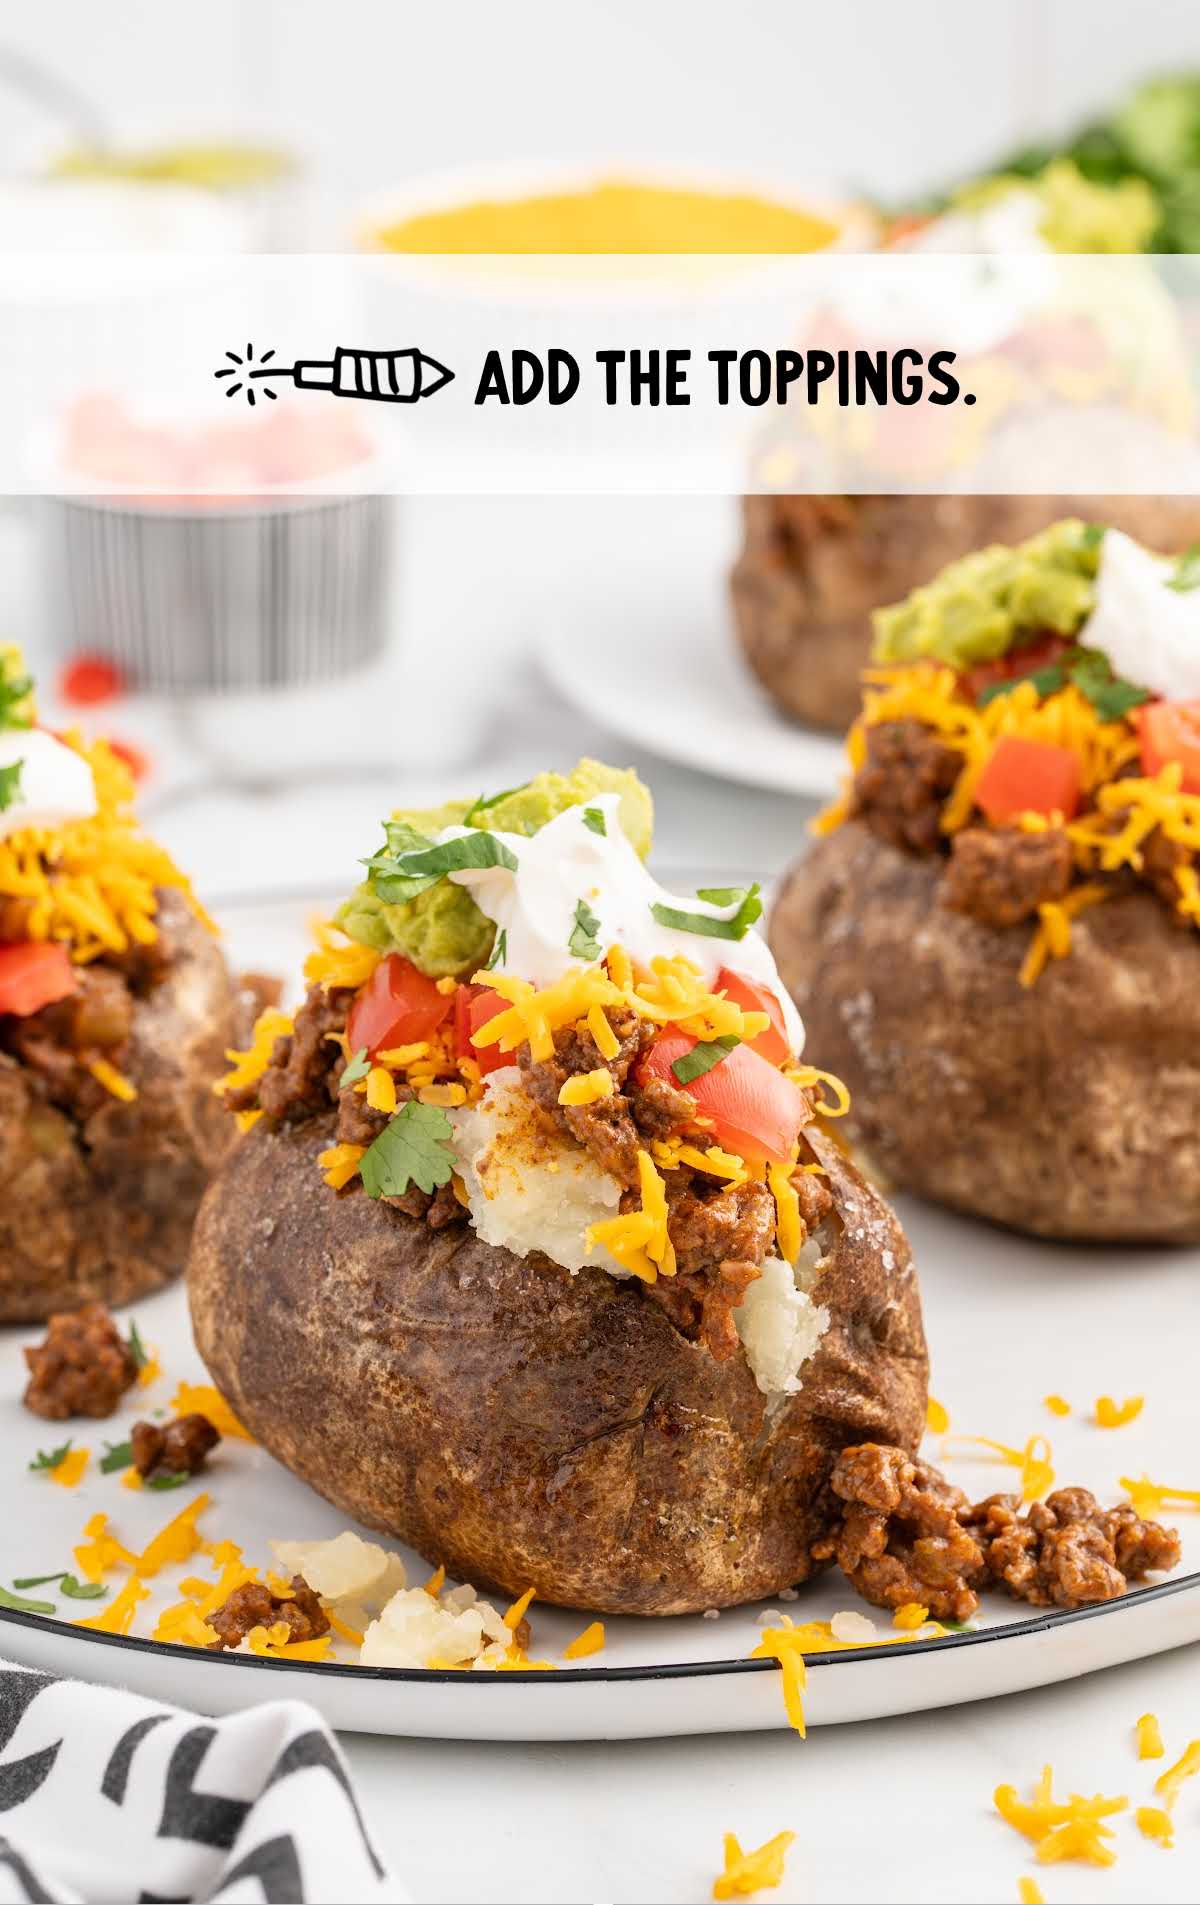 toppings added to the baked potato